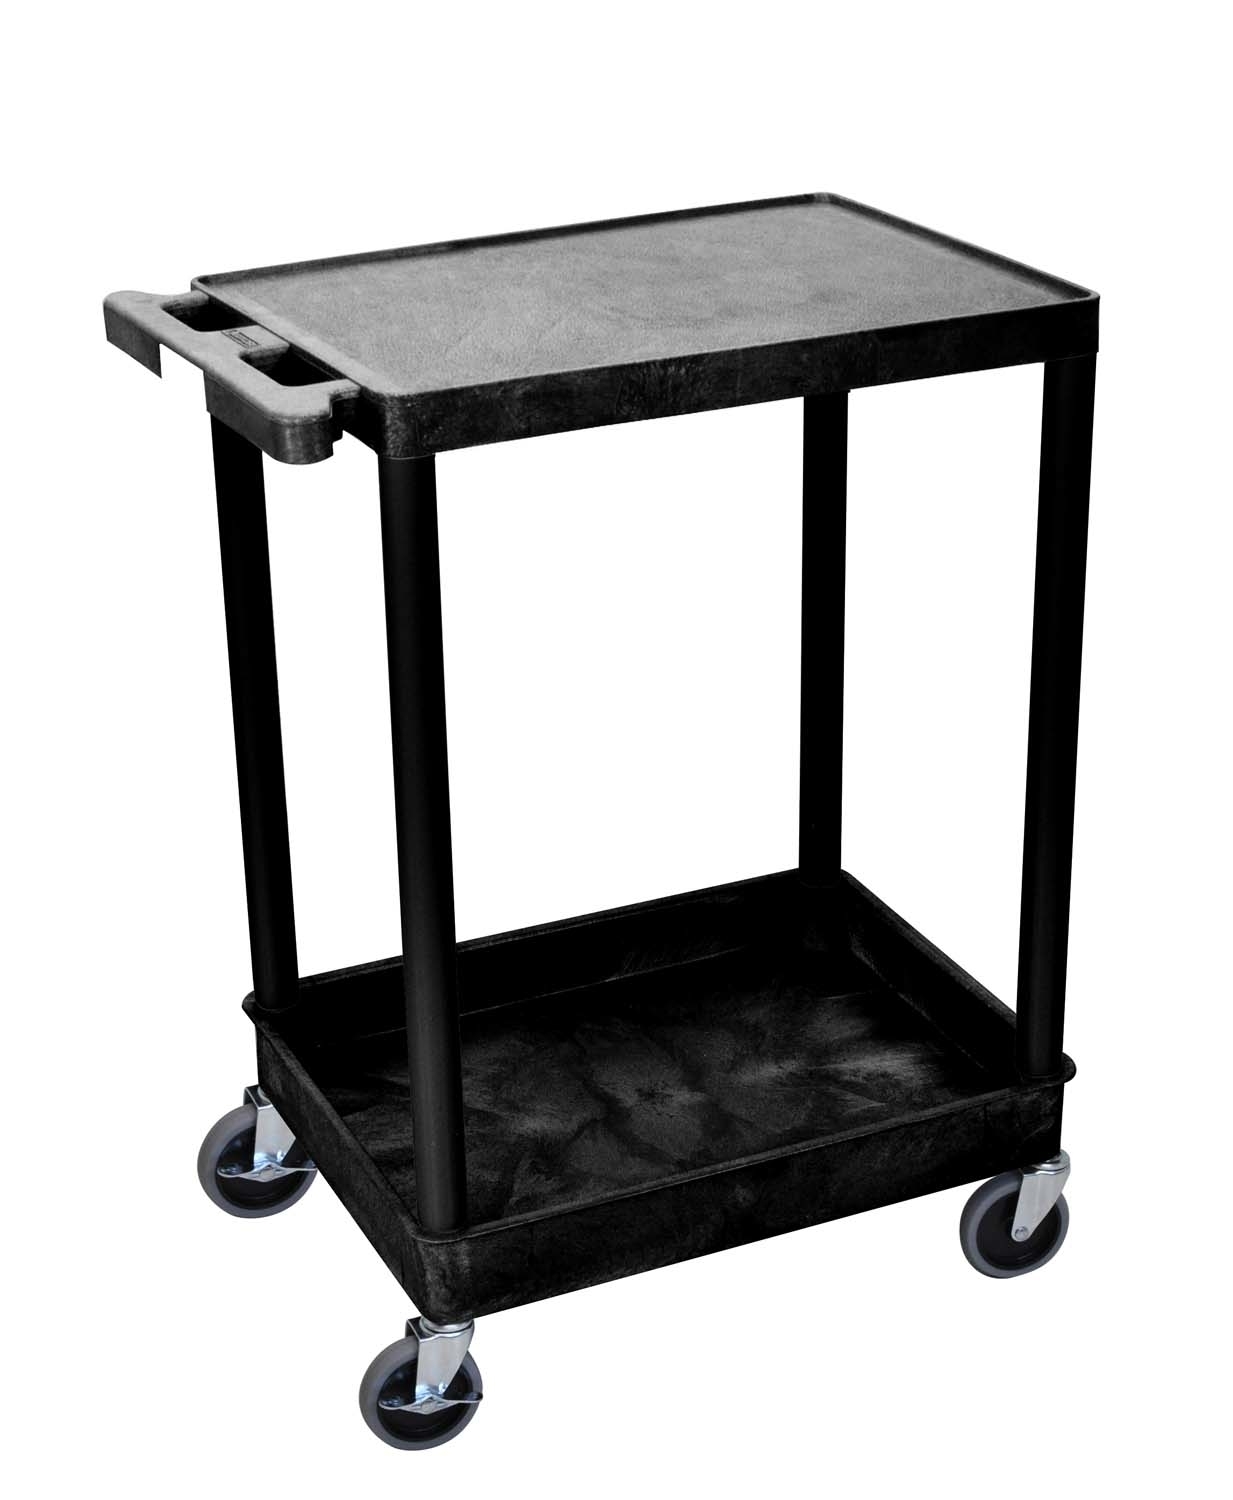 Offex Stc21 Flat Top And Tub Bottom Shelf Cart